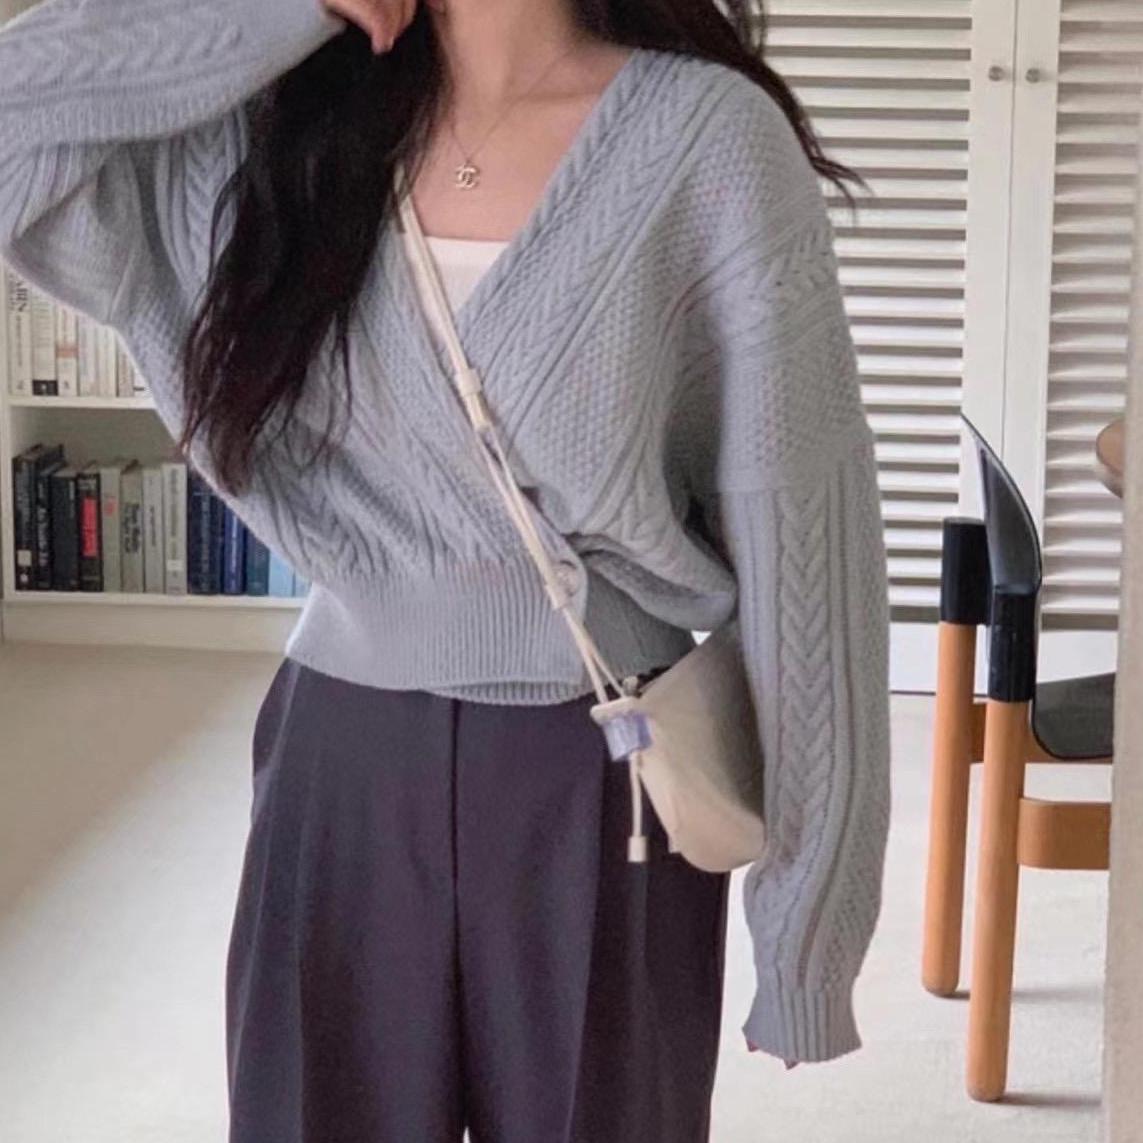 T712 MIKO KNIT TOP